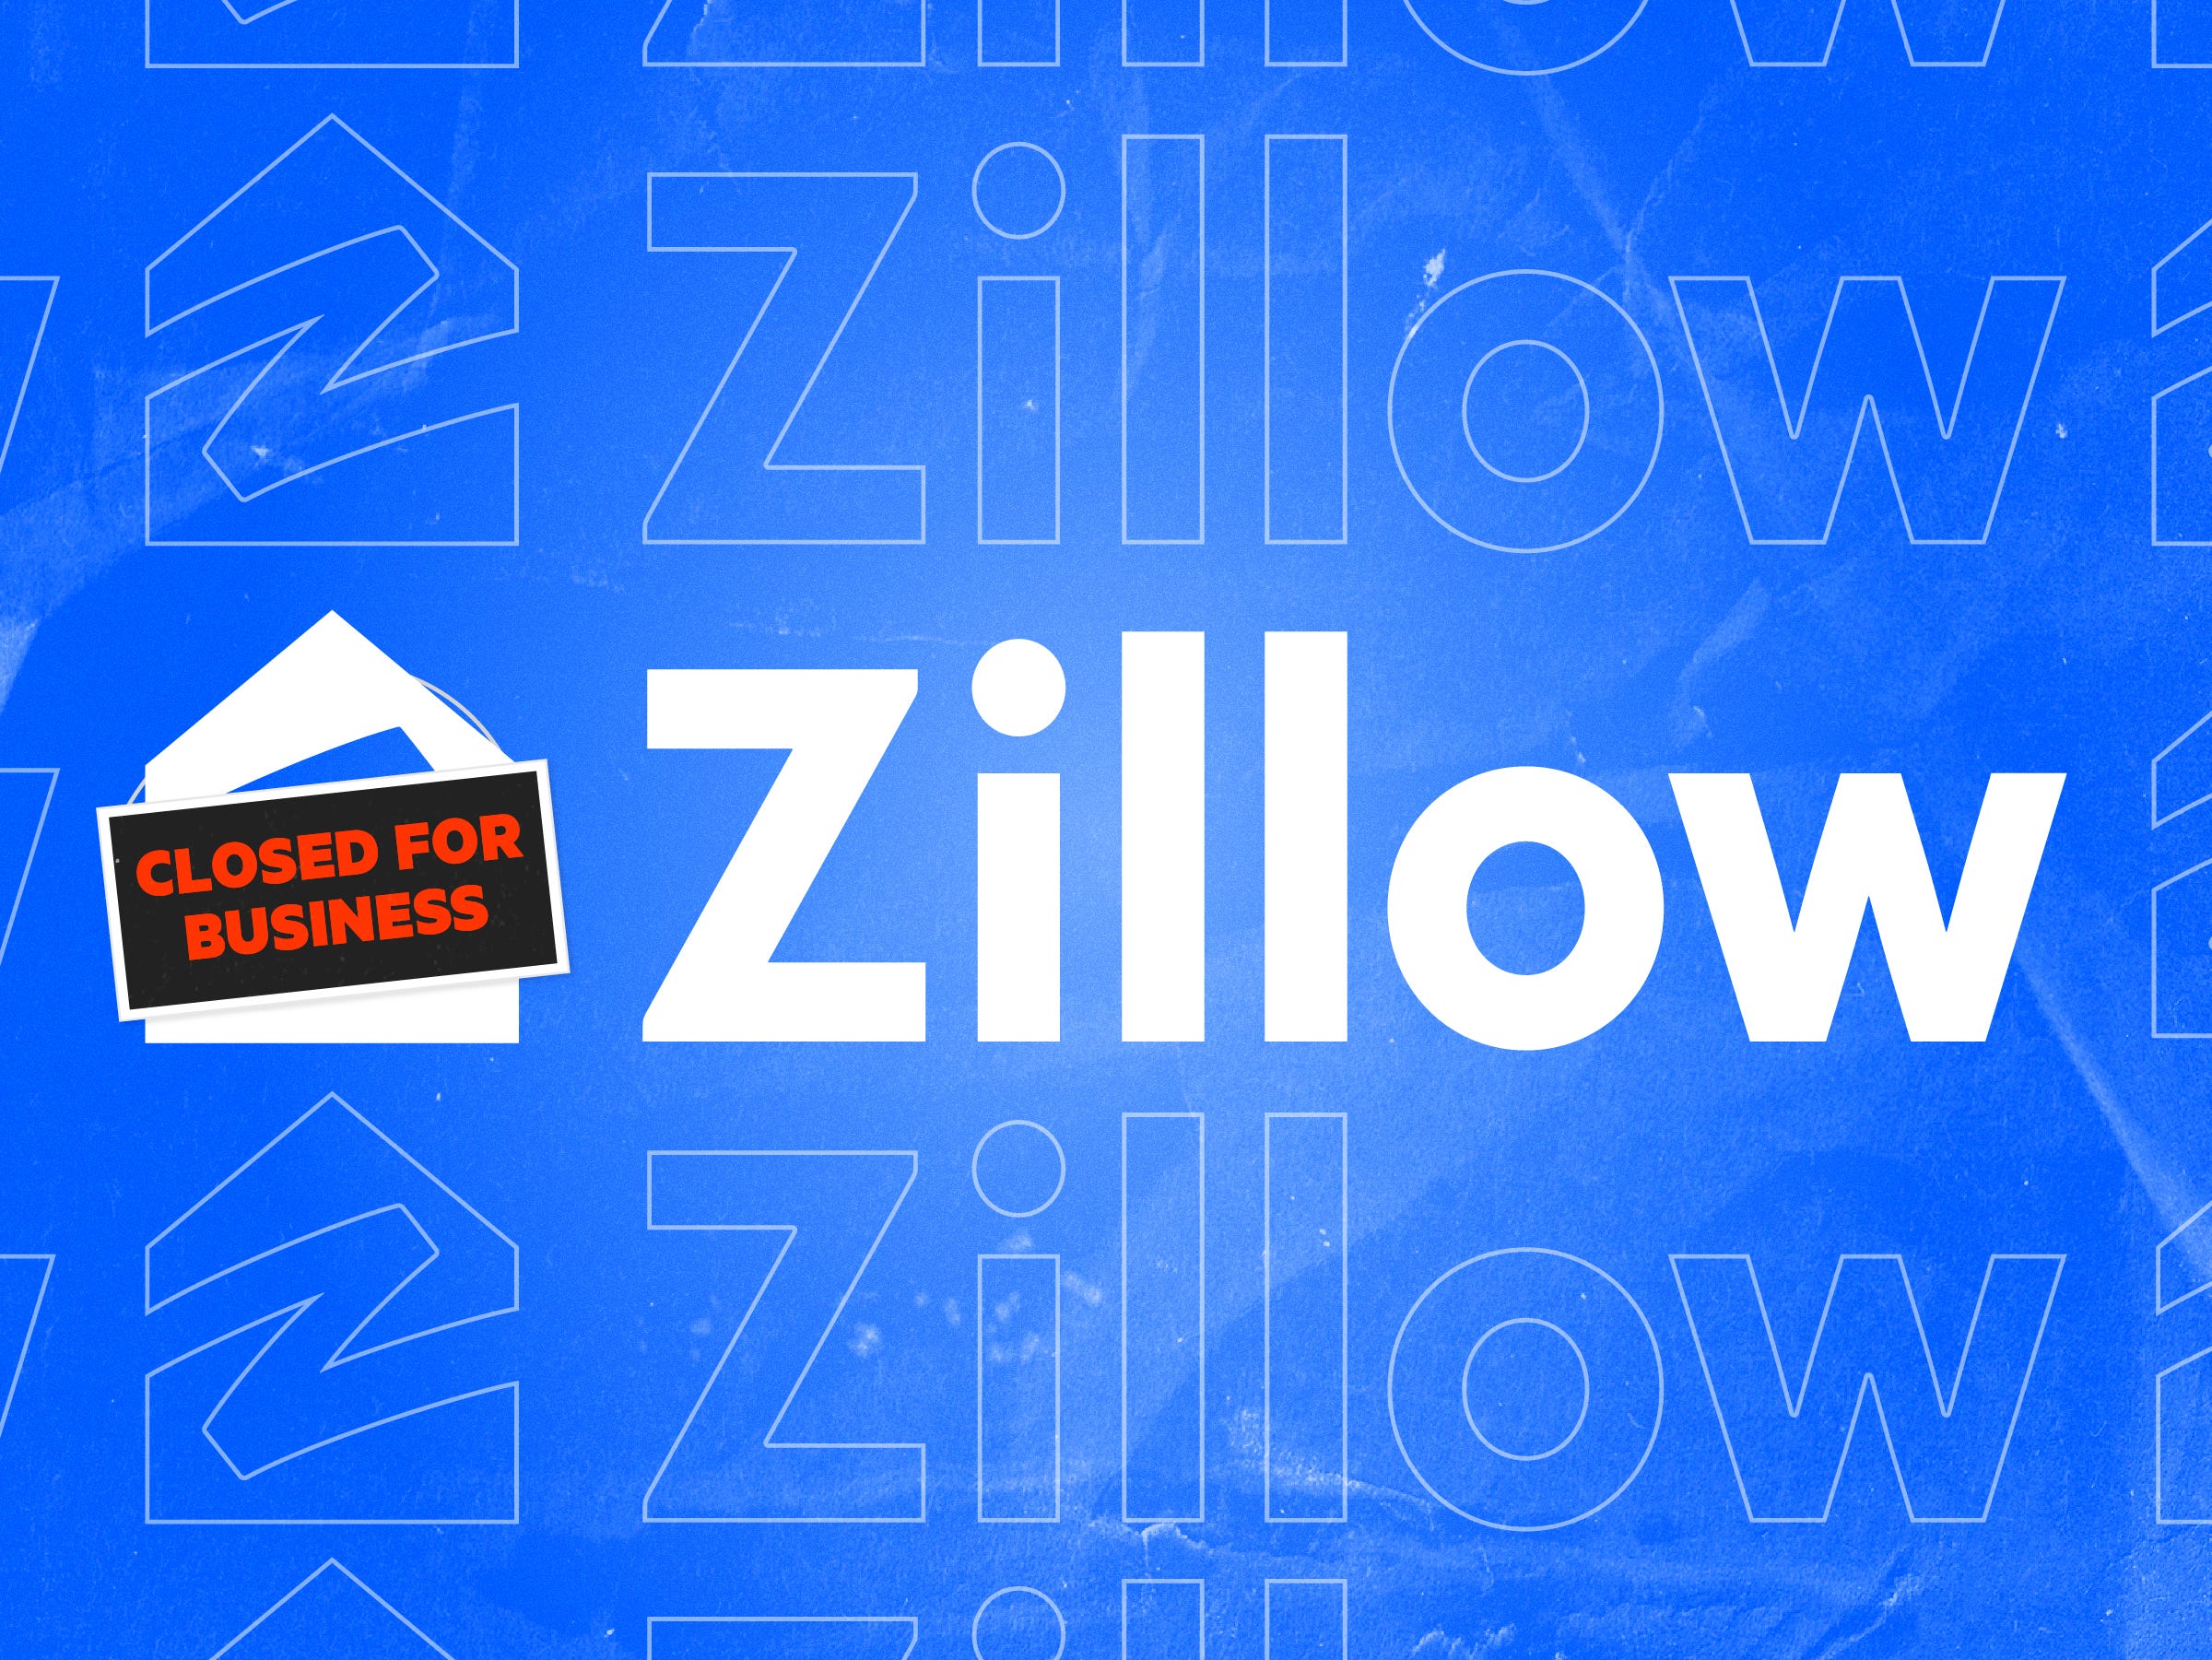 Zillow logo with a "closed for business" sign over the house portion of the logo on a blue background